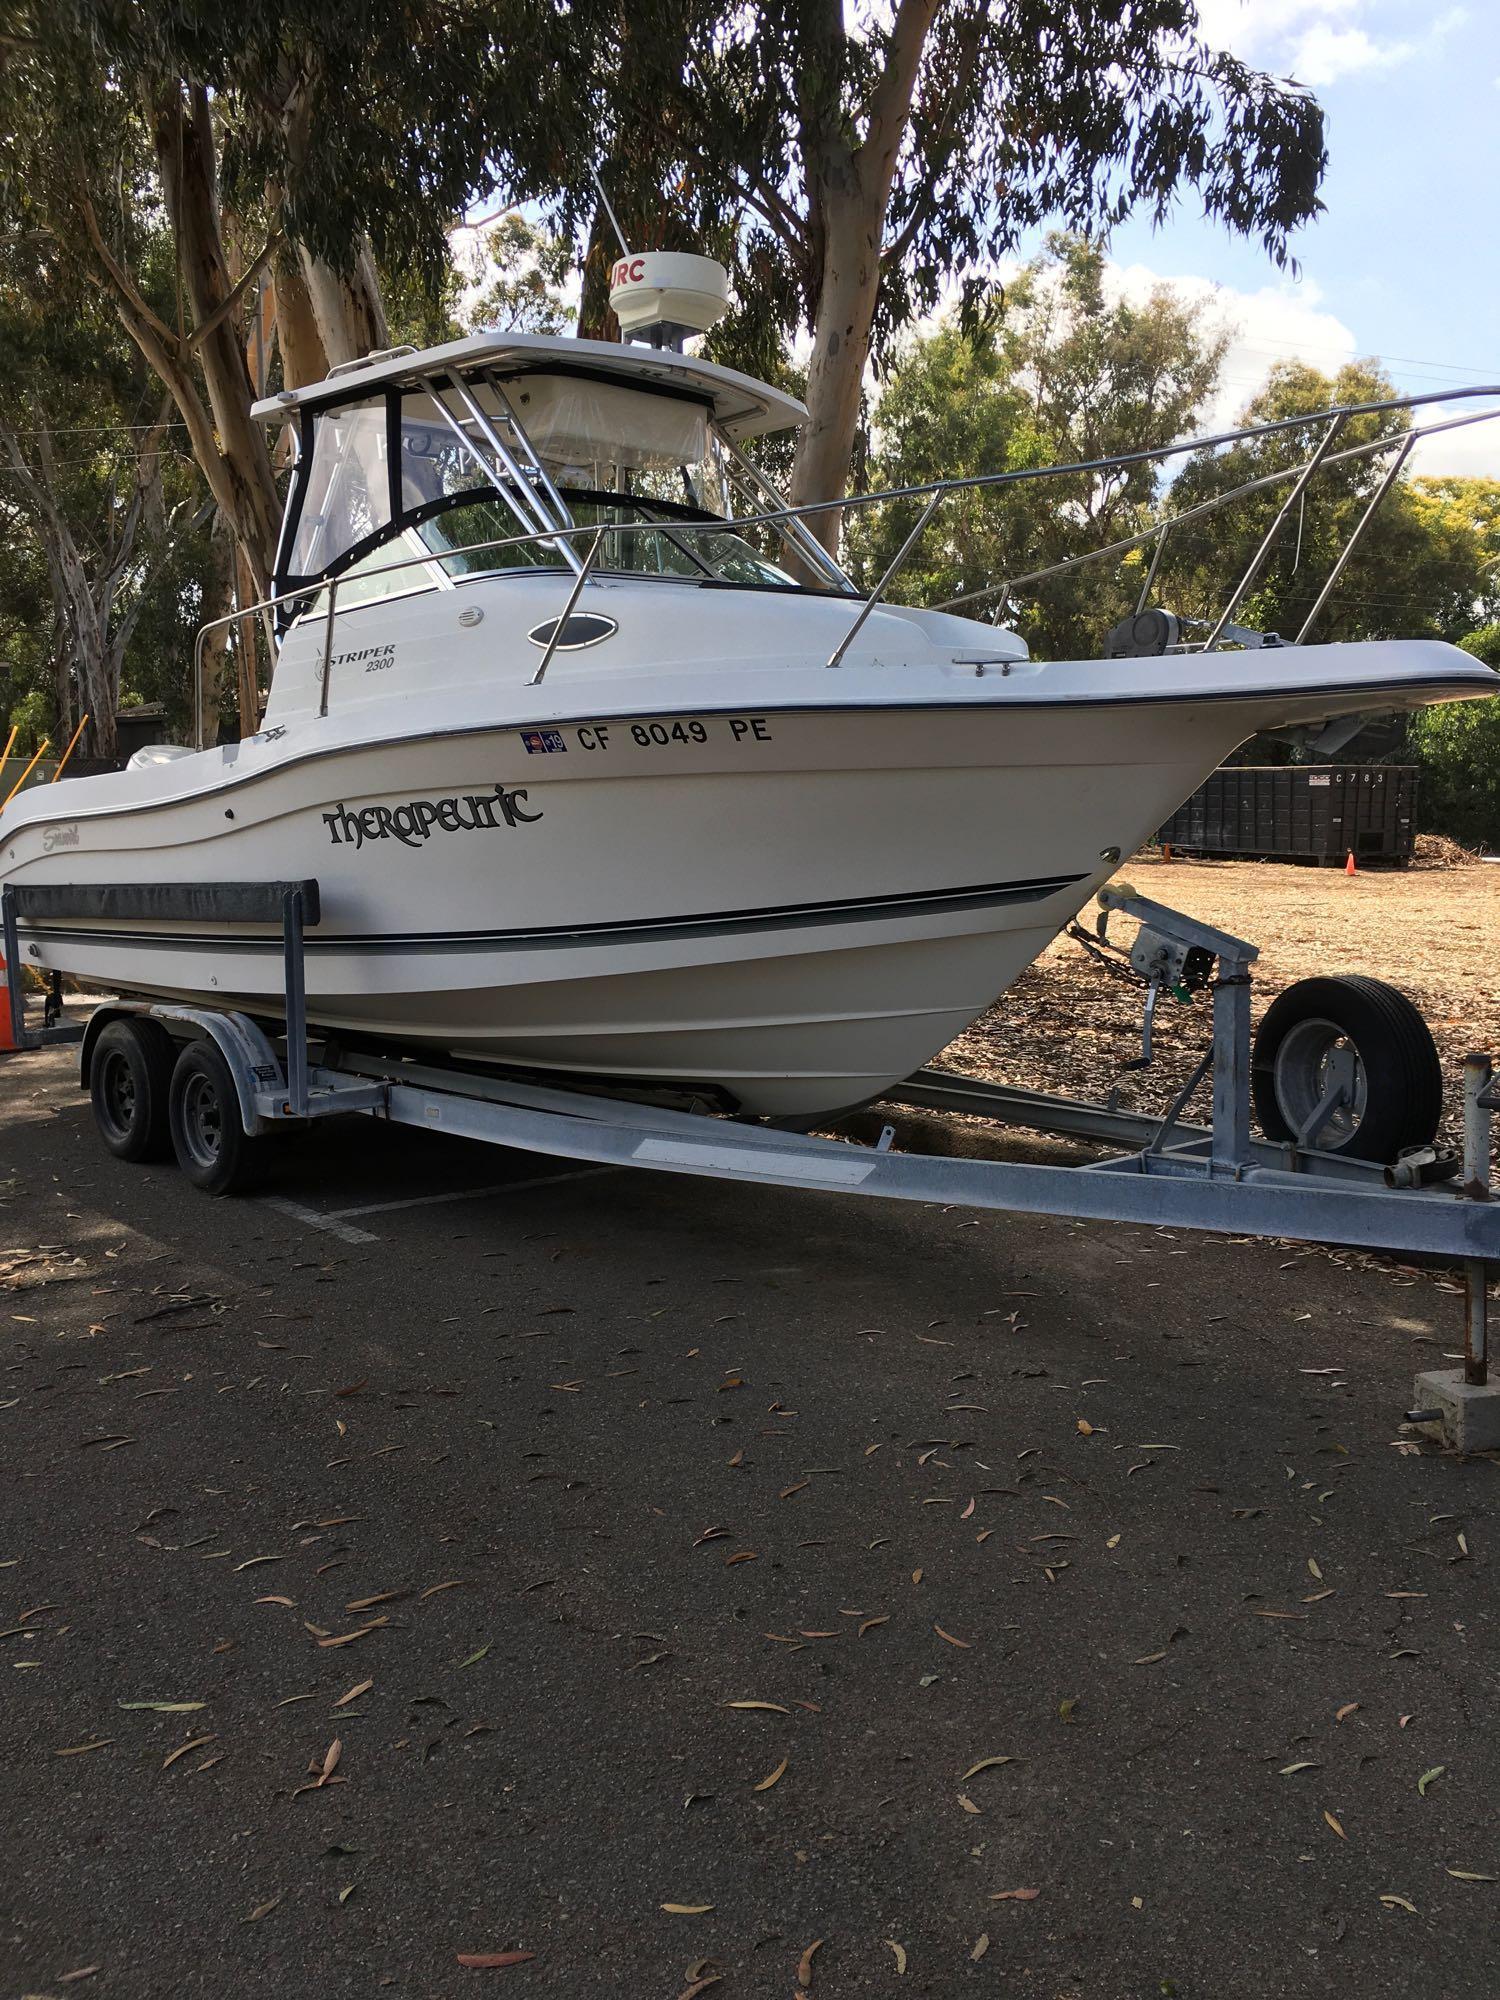 1998 SeaSwirl Striper 2300 with Evinrude  E-Tec (engine turns over) # 6 injector needs replacement